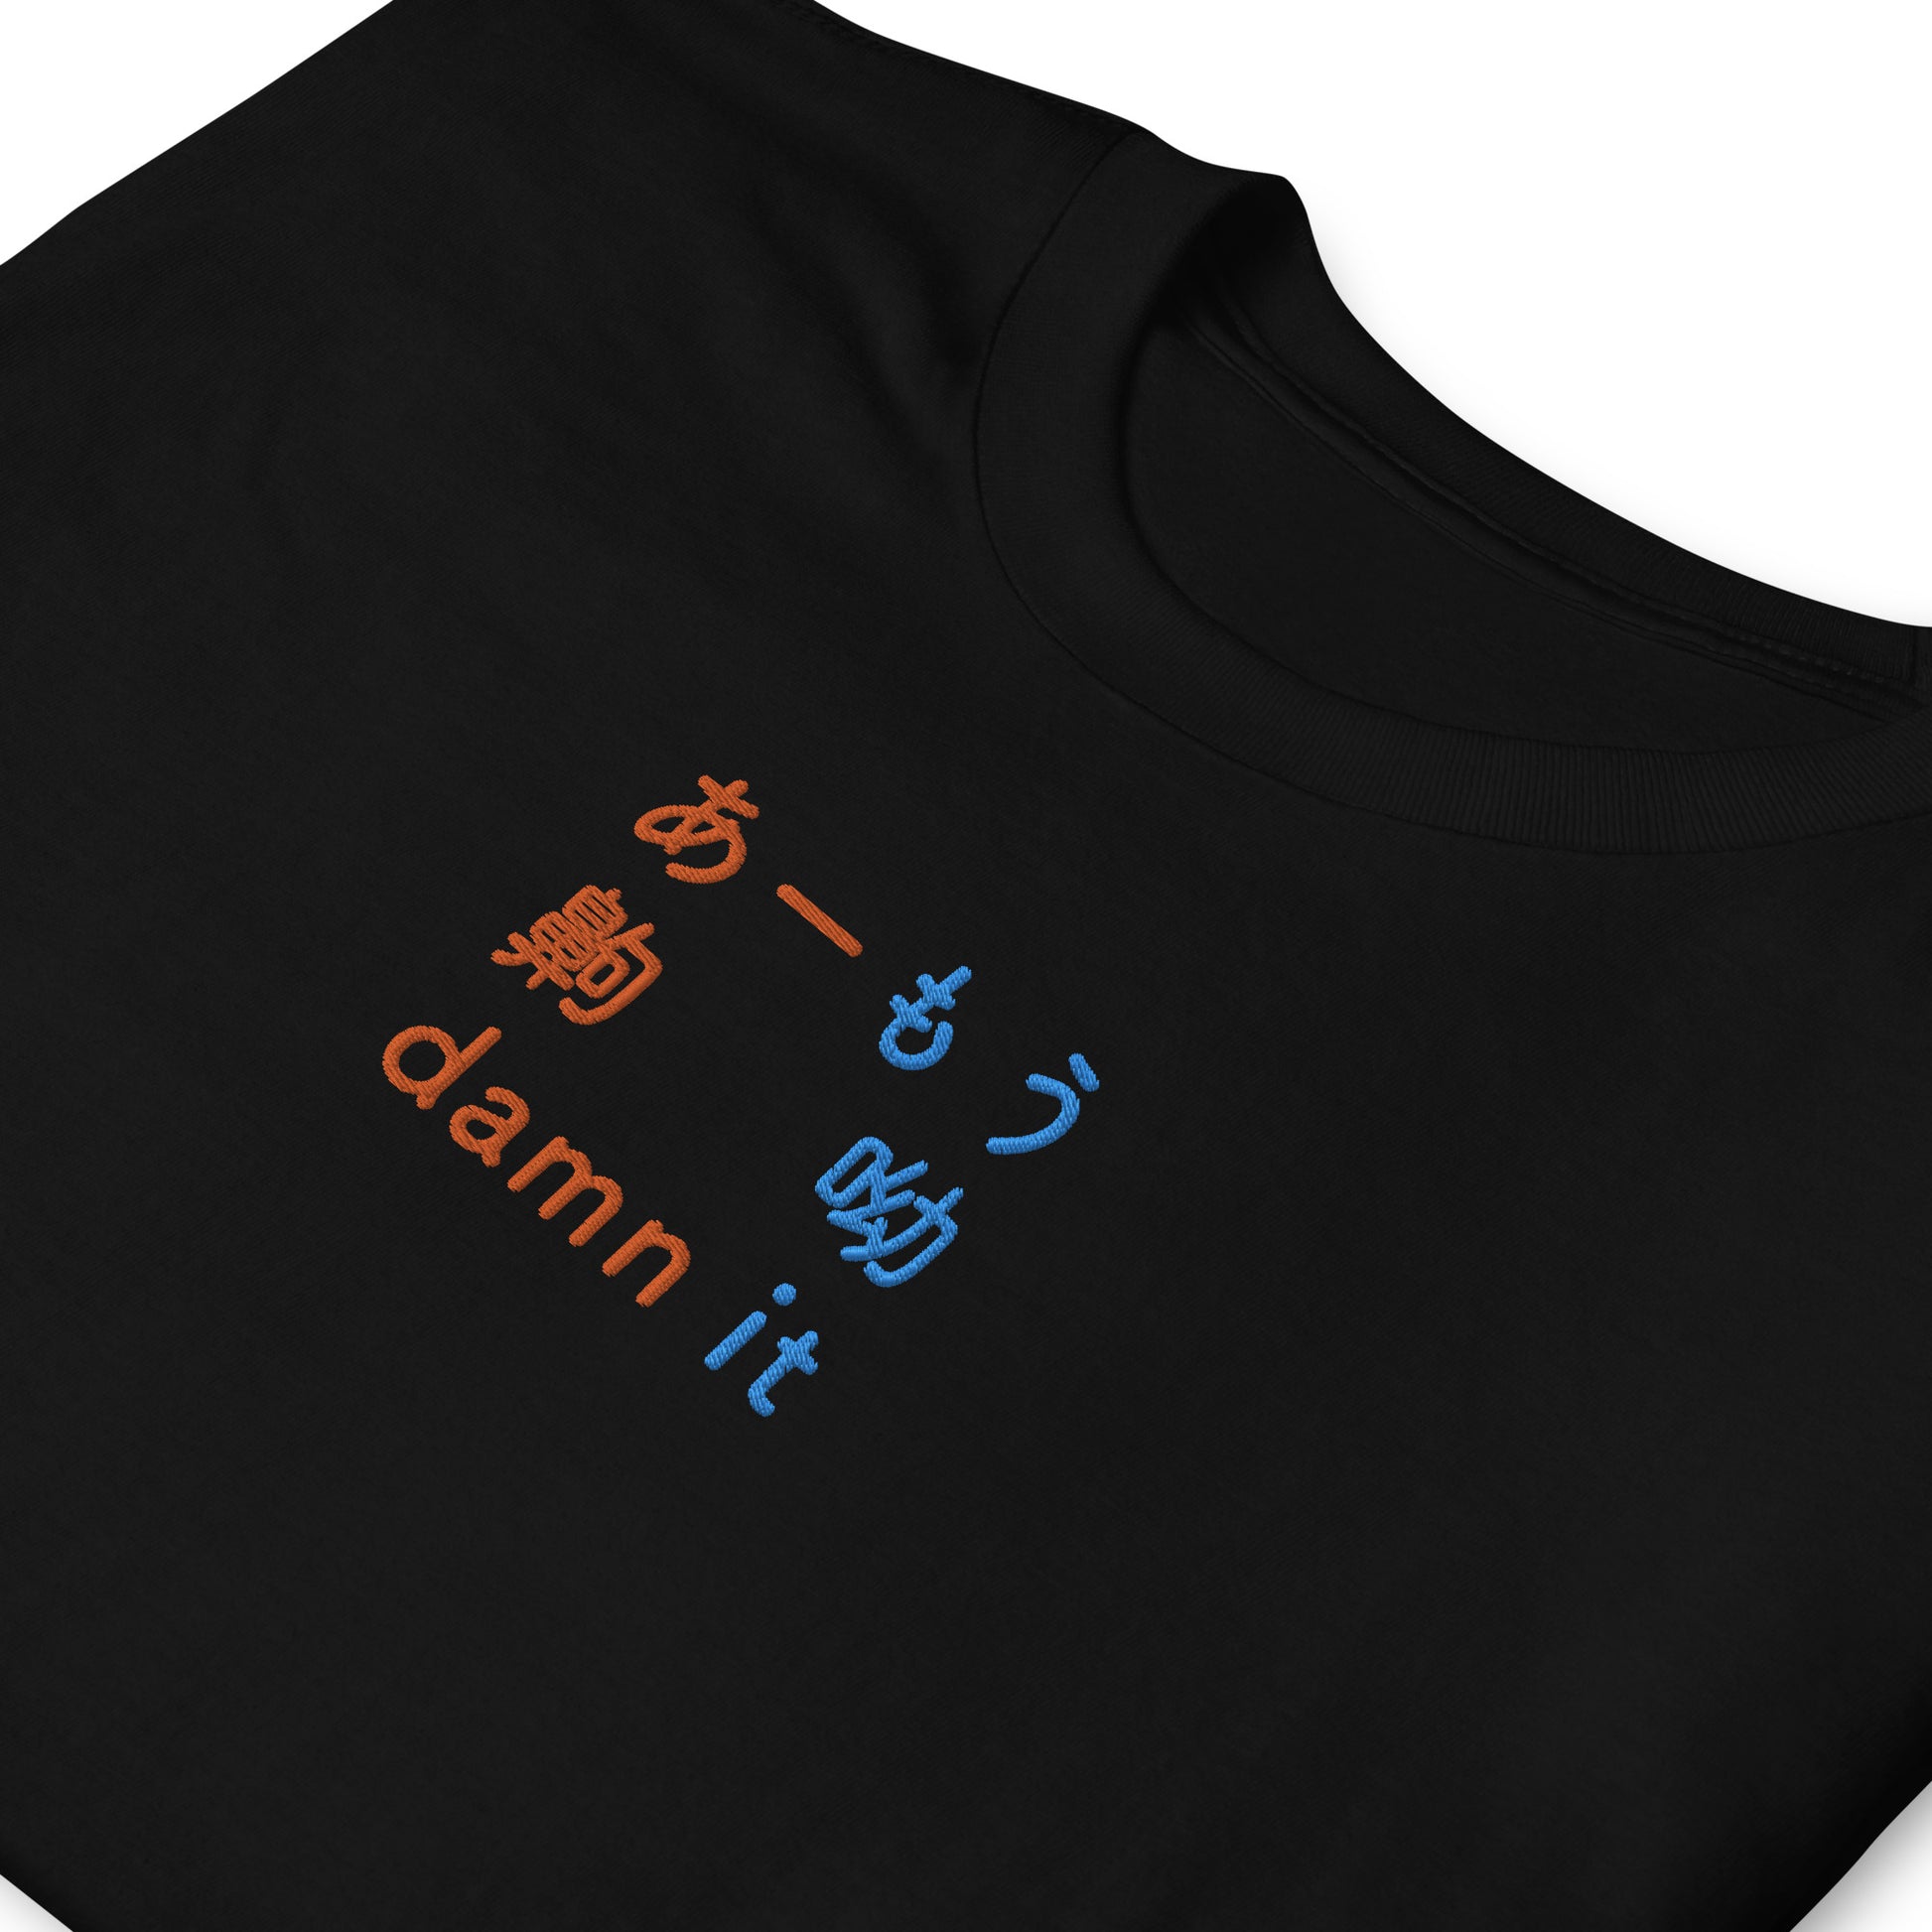 Black High Quality Tee - Front Design with an Orange,Blue Embroidery "Damn it" in Japanese,Chinese and English